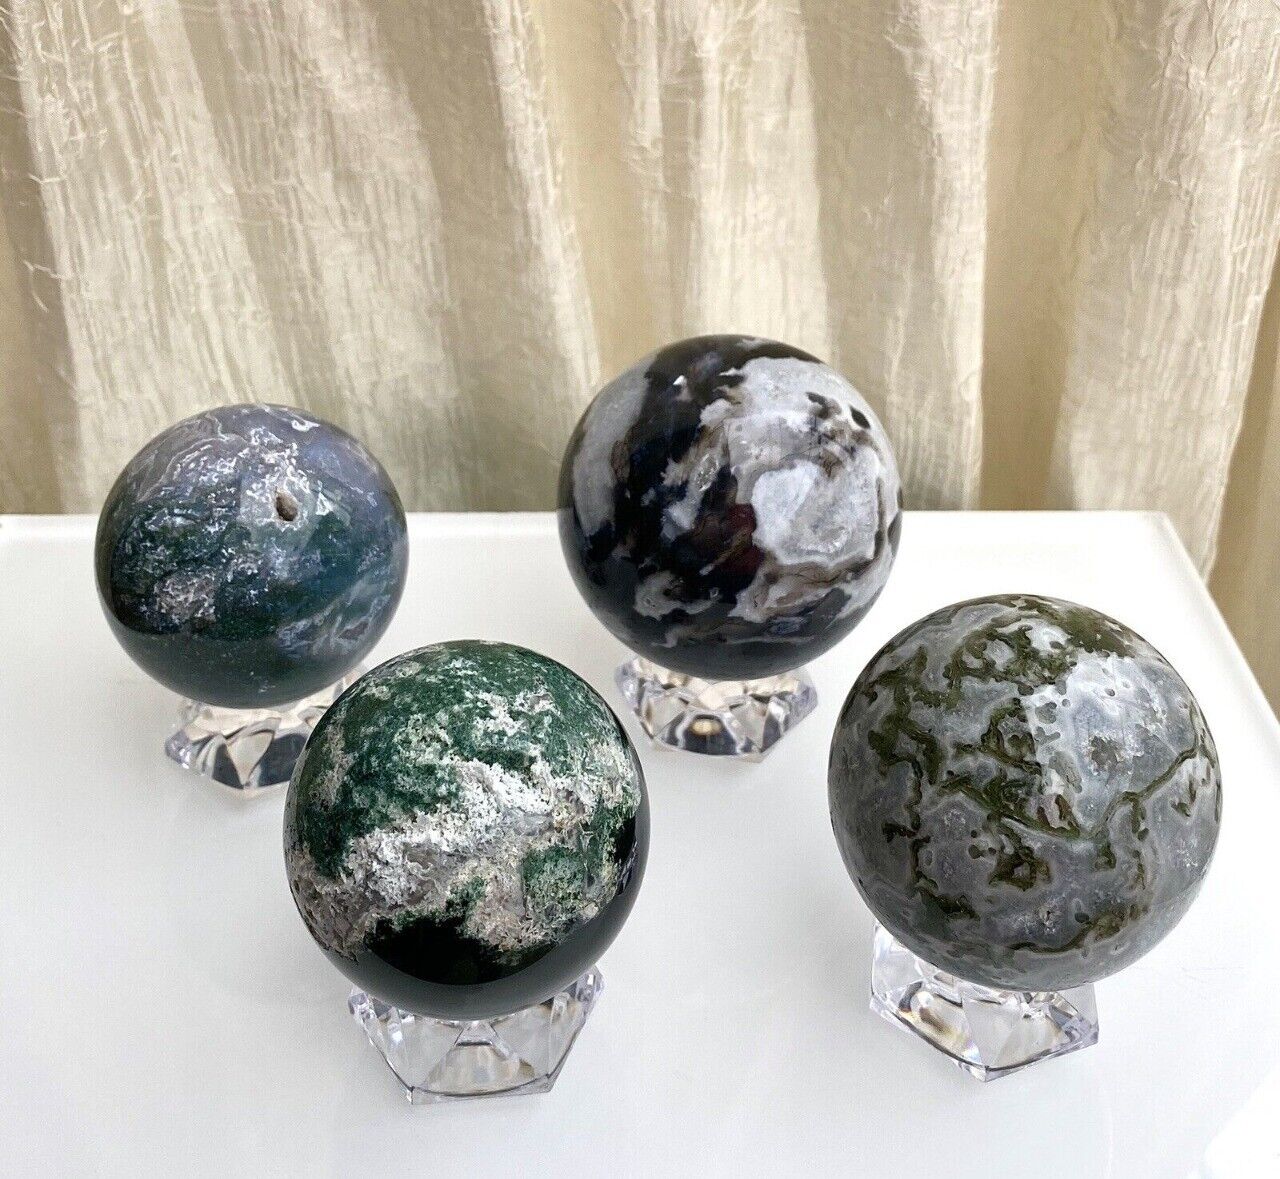 Wholesale Lot 3-4 Pcs 3-4.5 Lbs Natural Moss Agate Spheres Crystal Ball